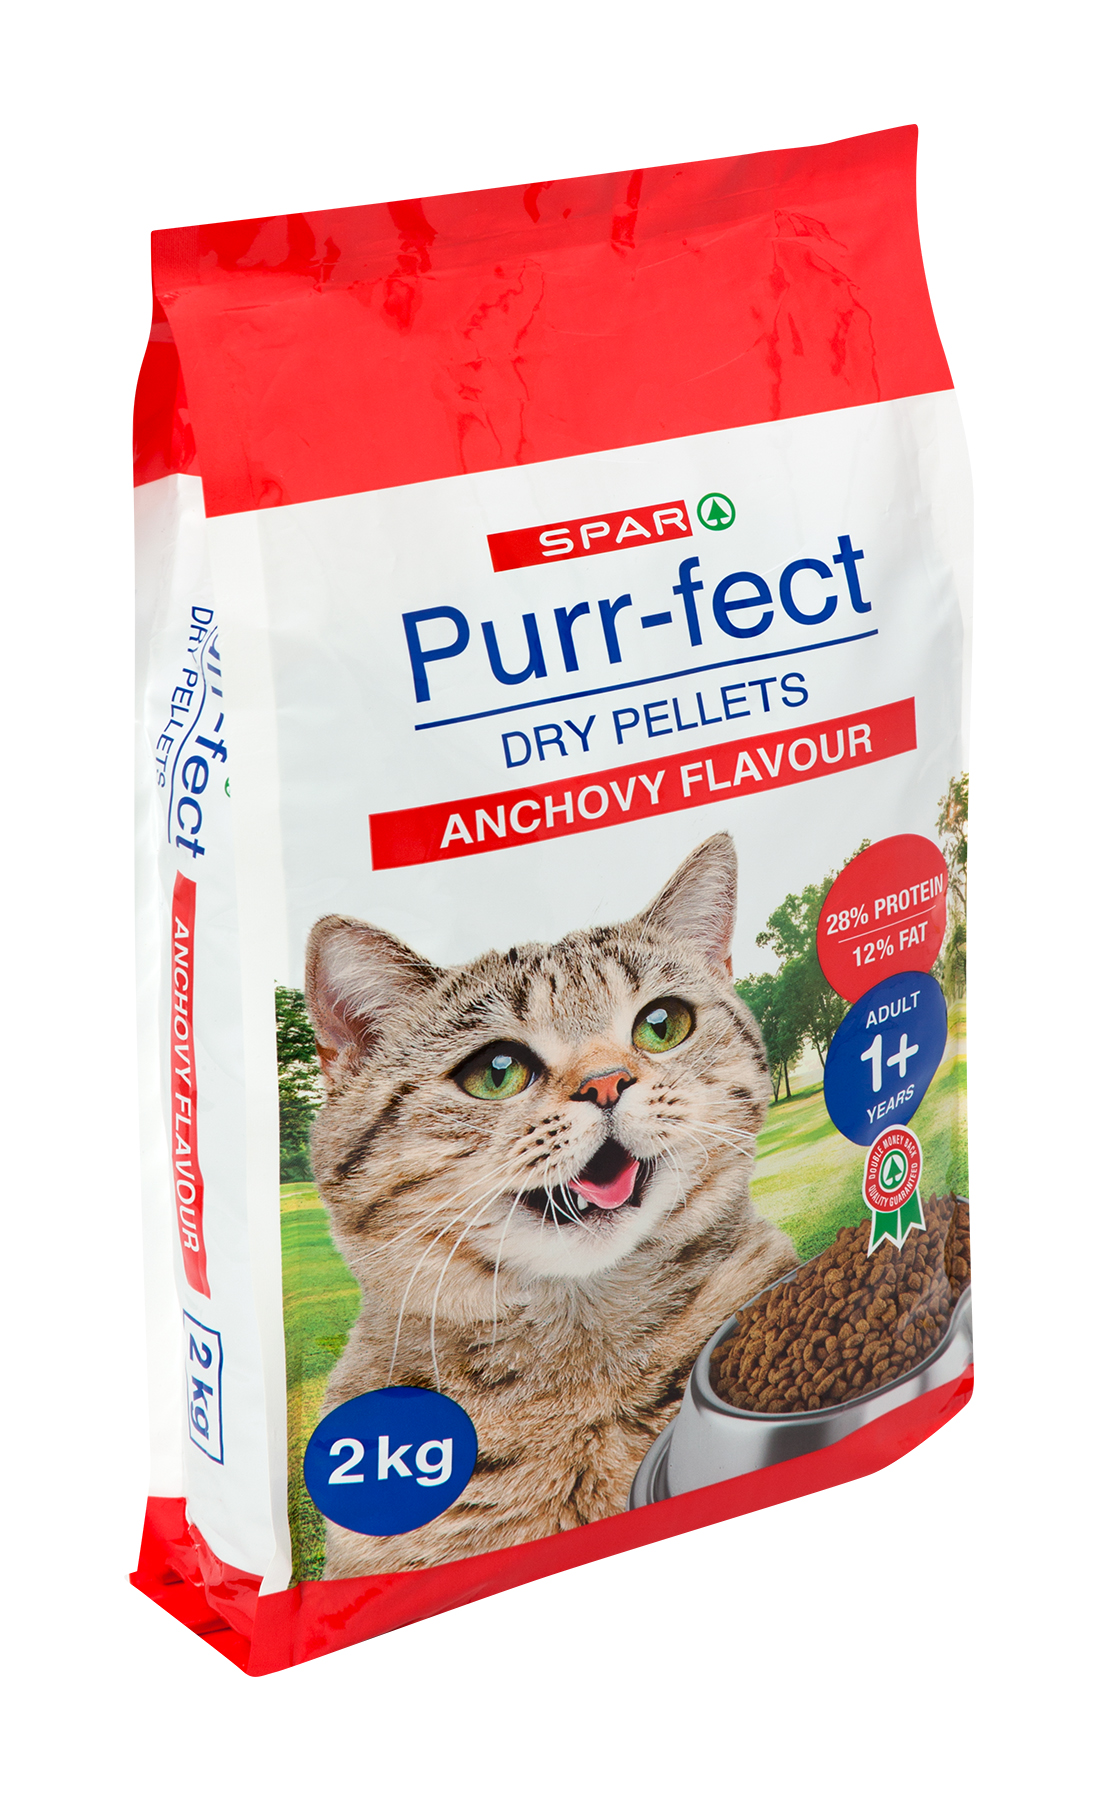 cat food purr-fect dry chunks - anchovy flavour (bag)